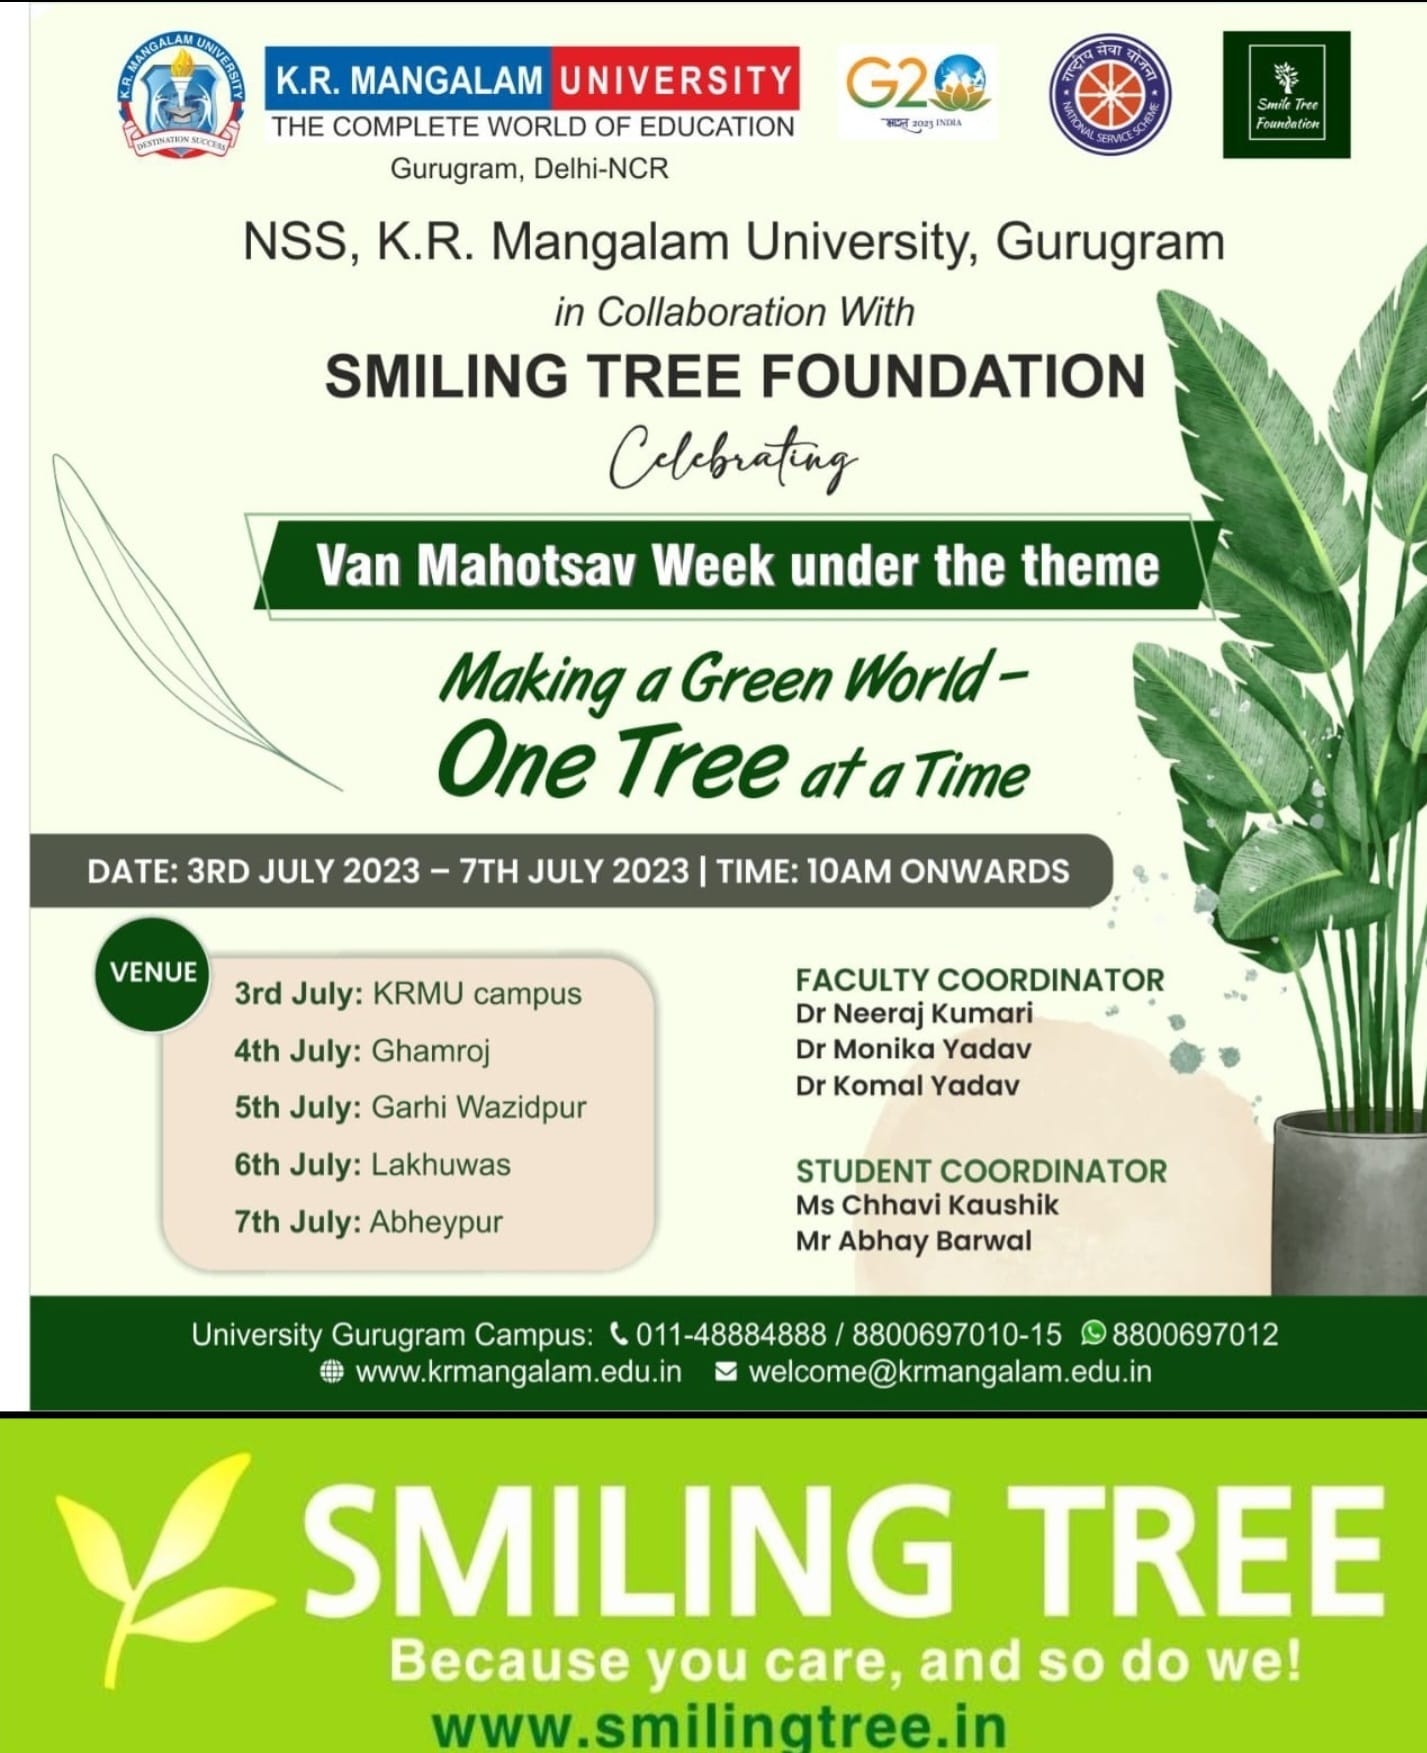 Smiling Tree in collaboration with KR Mangalam University, Gurugram, will be celebrating "Van Mahotsav Week" from 3rd July to 7th July, under the theme, 'Making a Green World - One Tree at a time'. Hundreds of saplings would be planted in the five villages adopted last year by Smiling Tree & KR Mangalam University